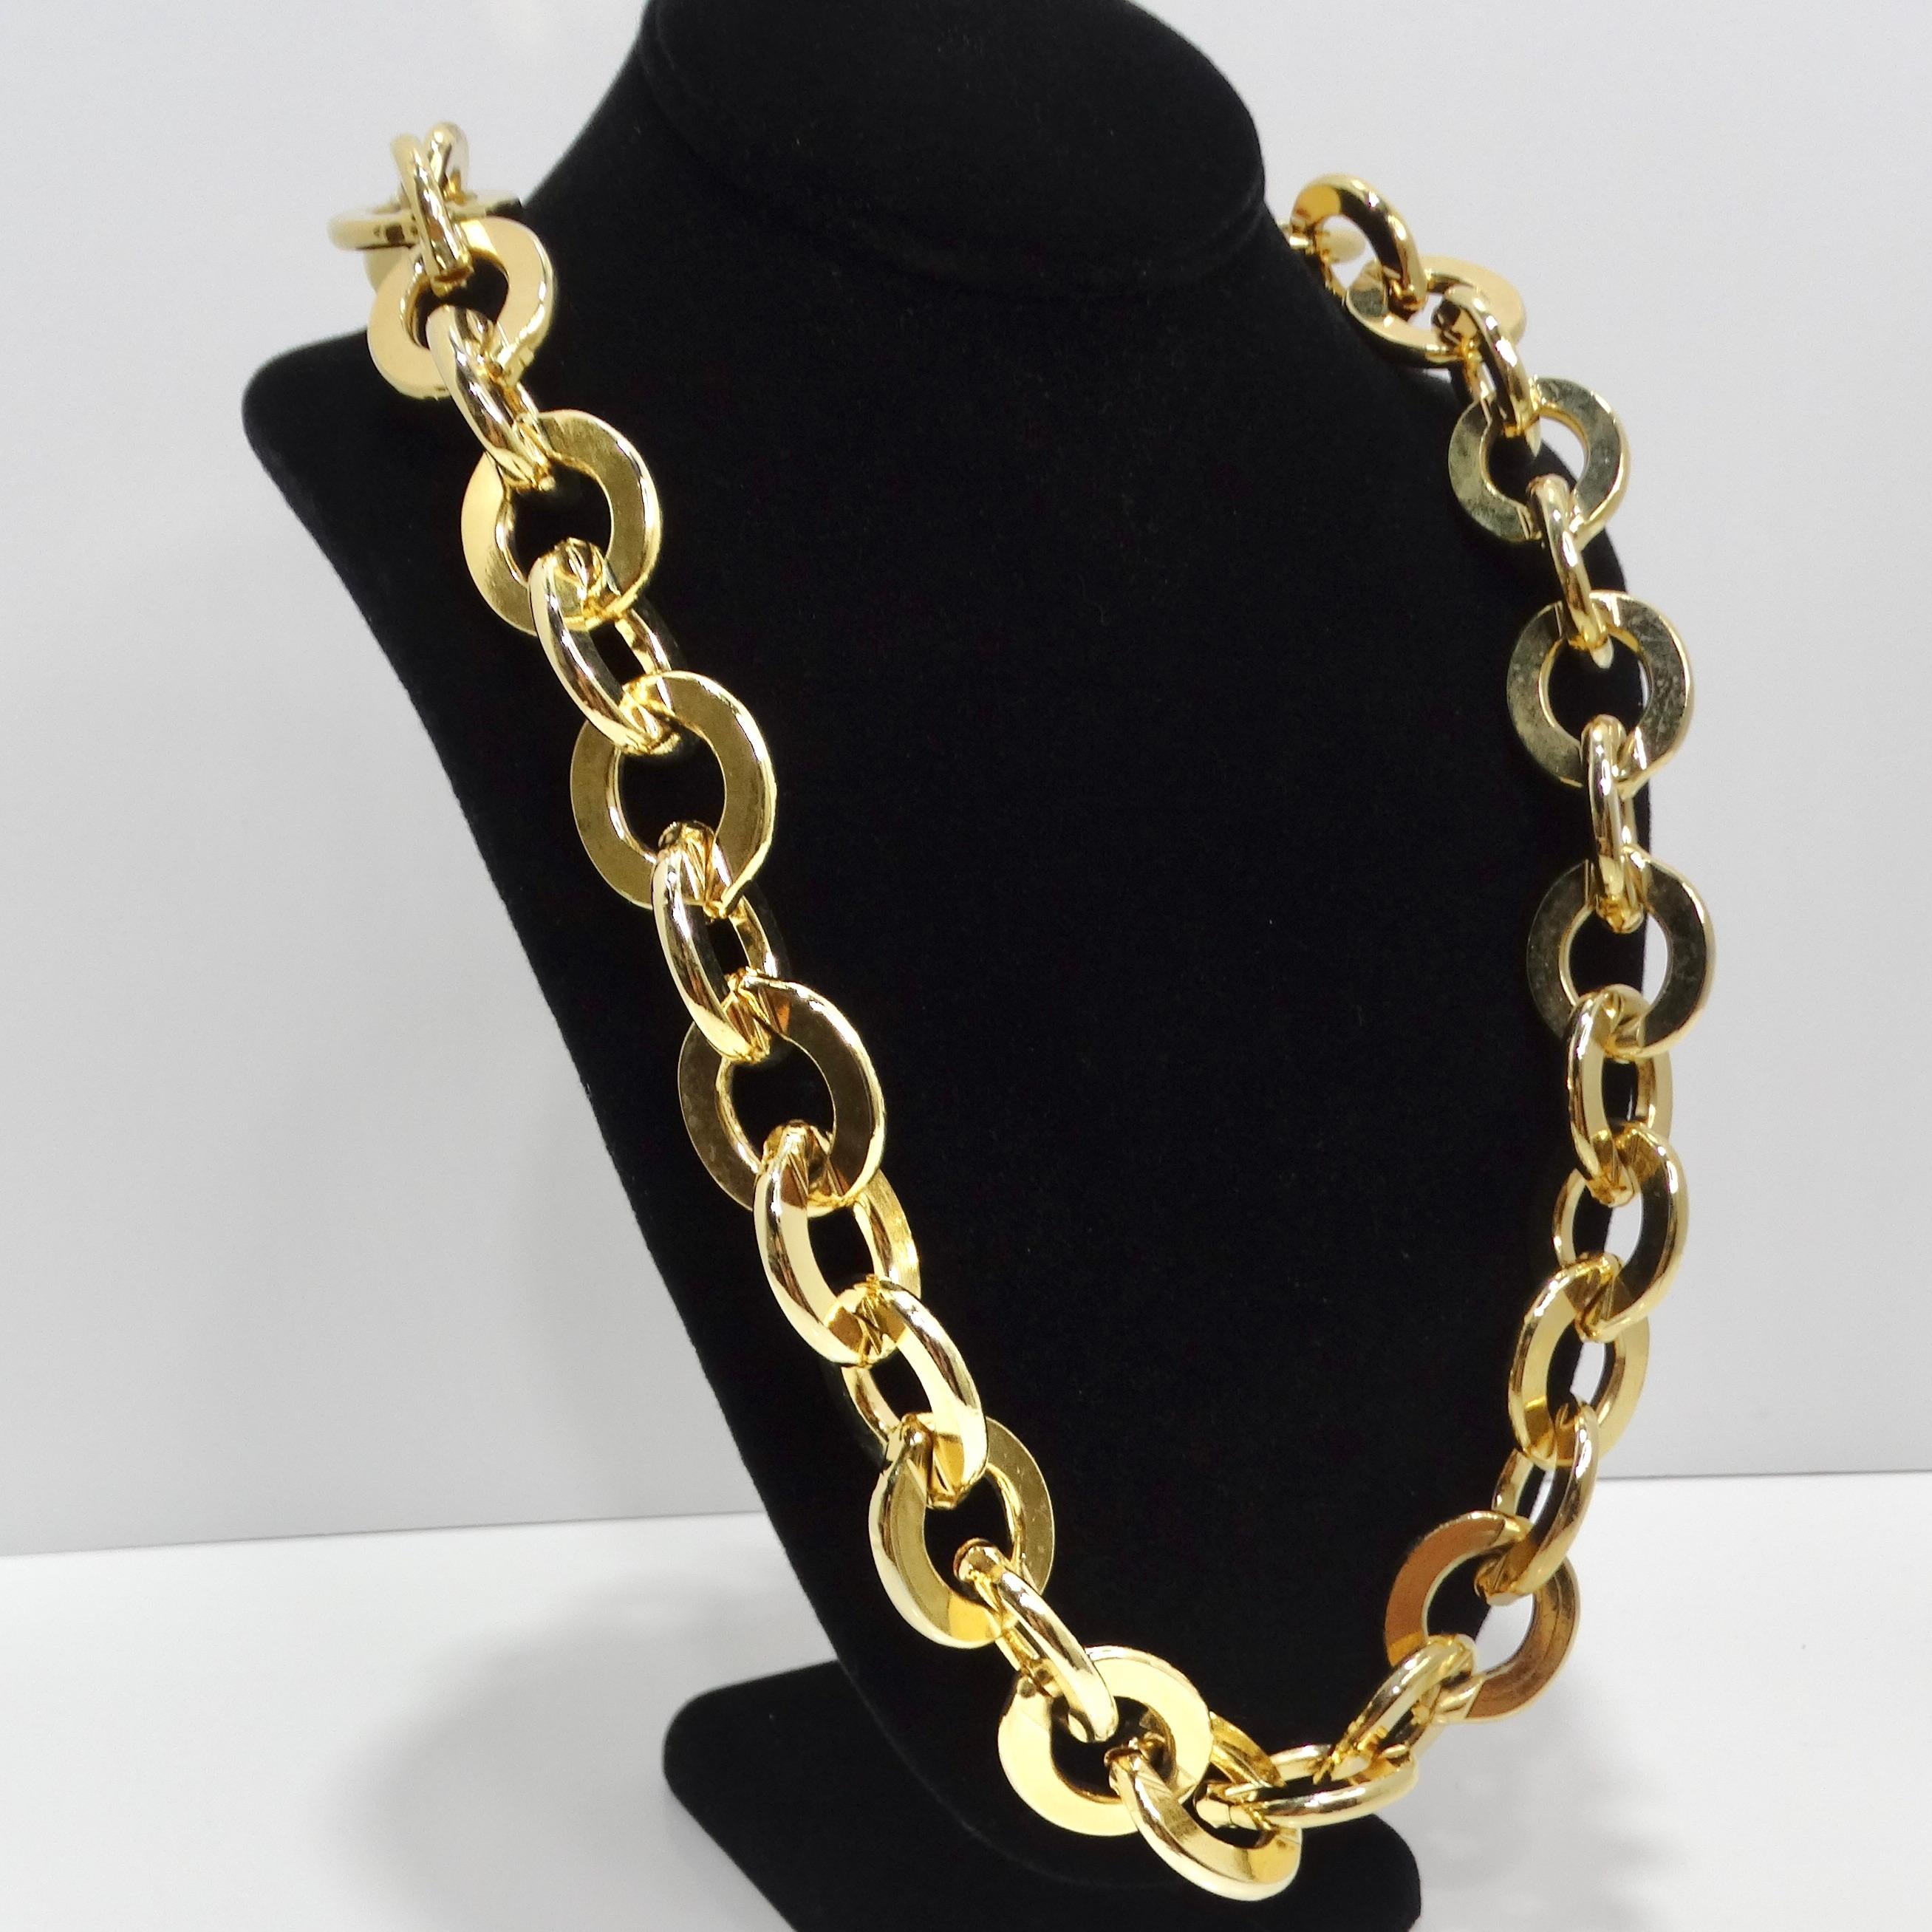 Erwin Pearl 1980s Gold Tone Chain Necklace In Excellent Condition For Sale In Scottsdale, AZ